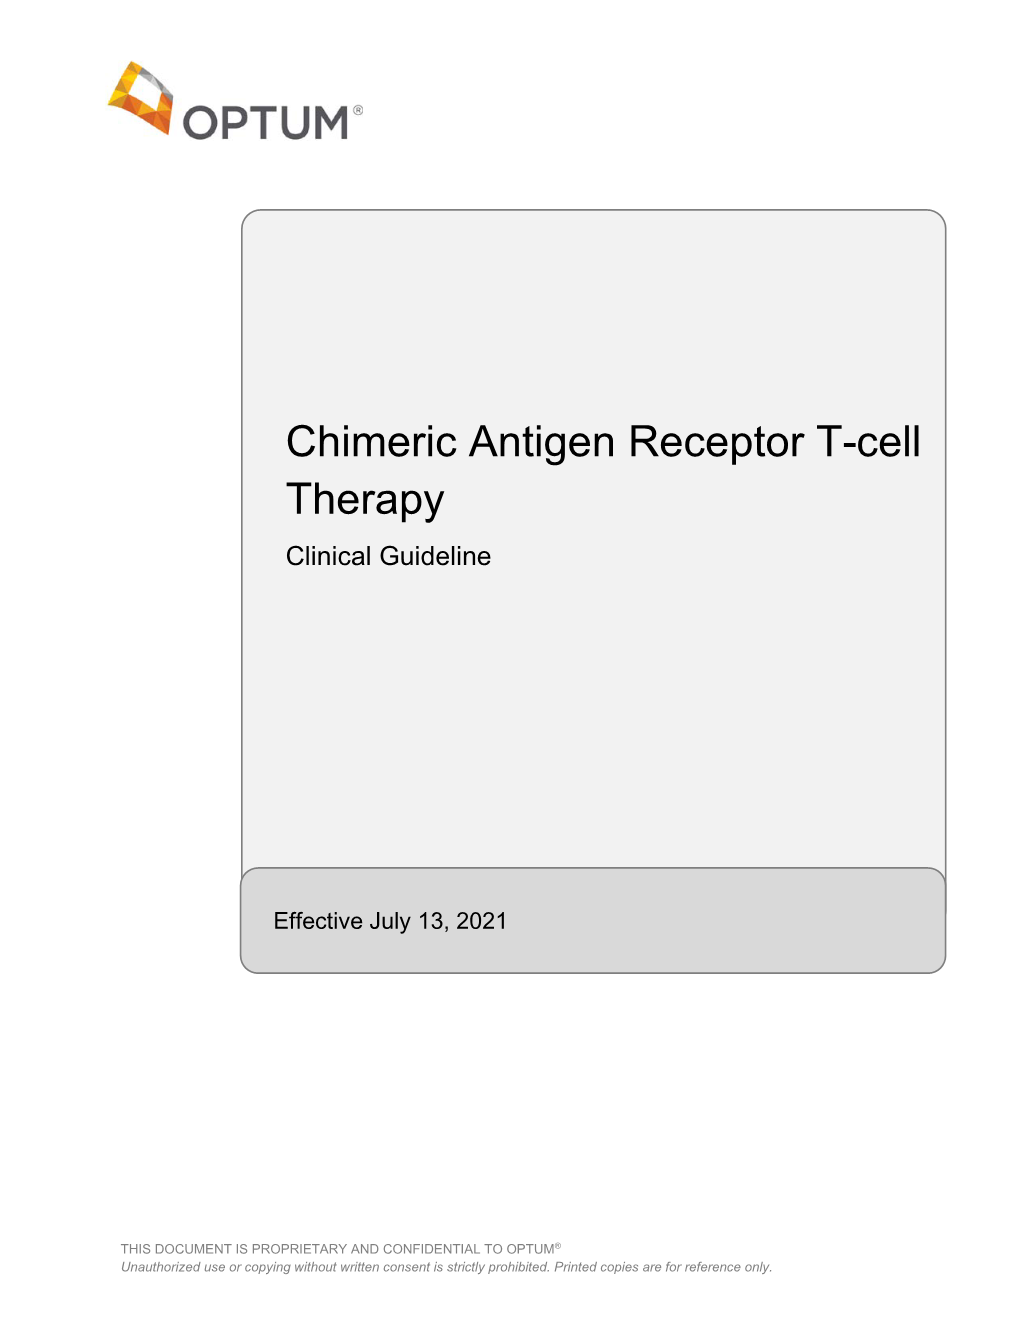 Chimeric Antigen Receptor T-Cell Therapy – Clinical Guidelines